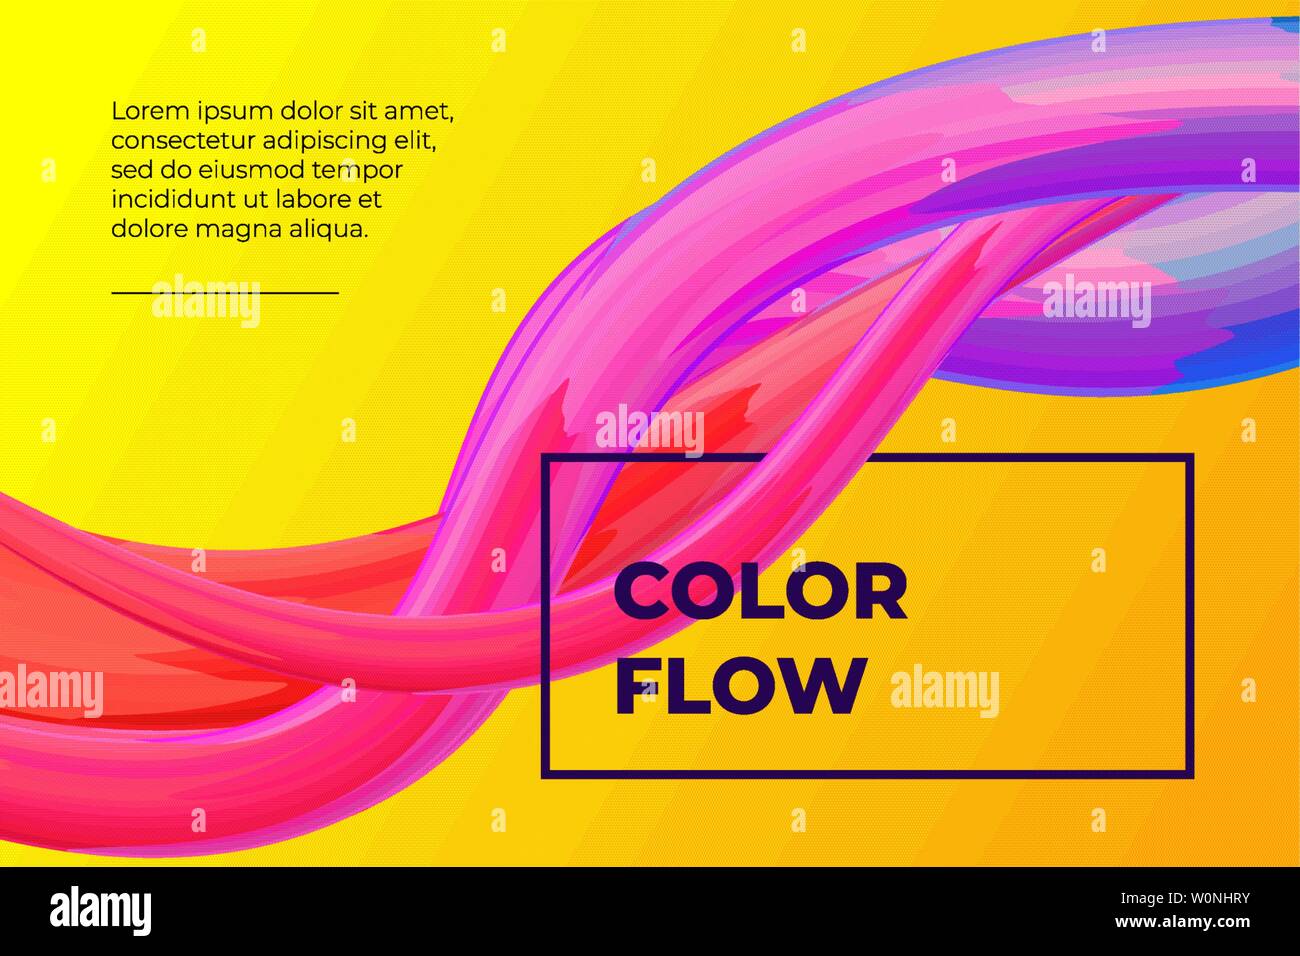 Modern colorful fluid flow poster. Wave liquid shape in yellow color background. Art design for design project. Vector gradient stroke illustration Stock Vector